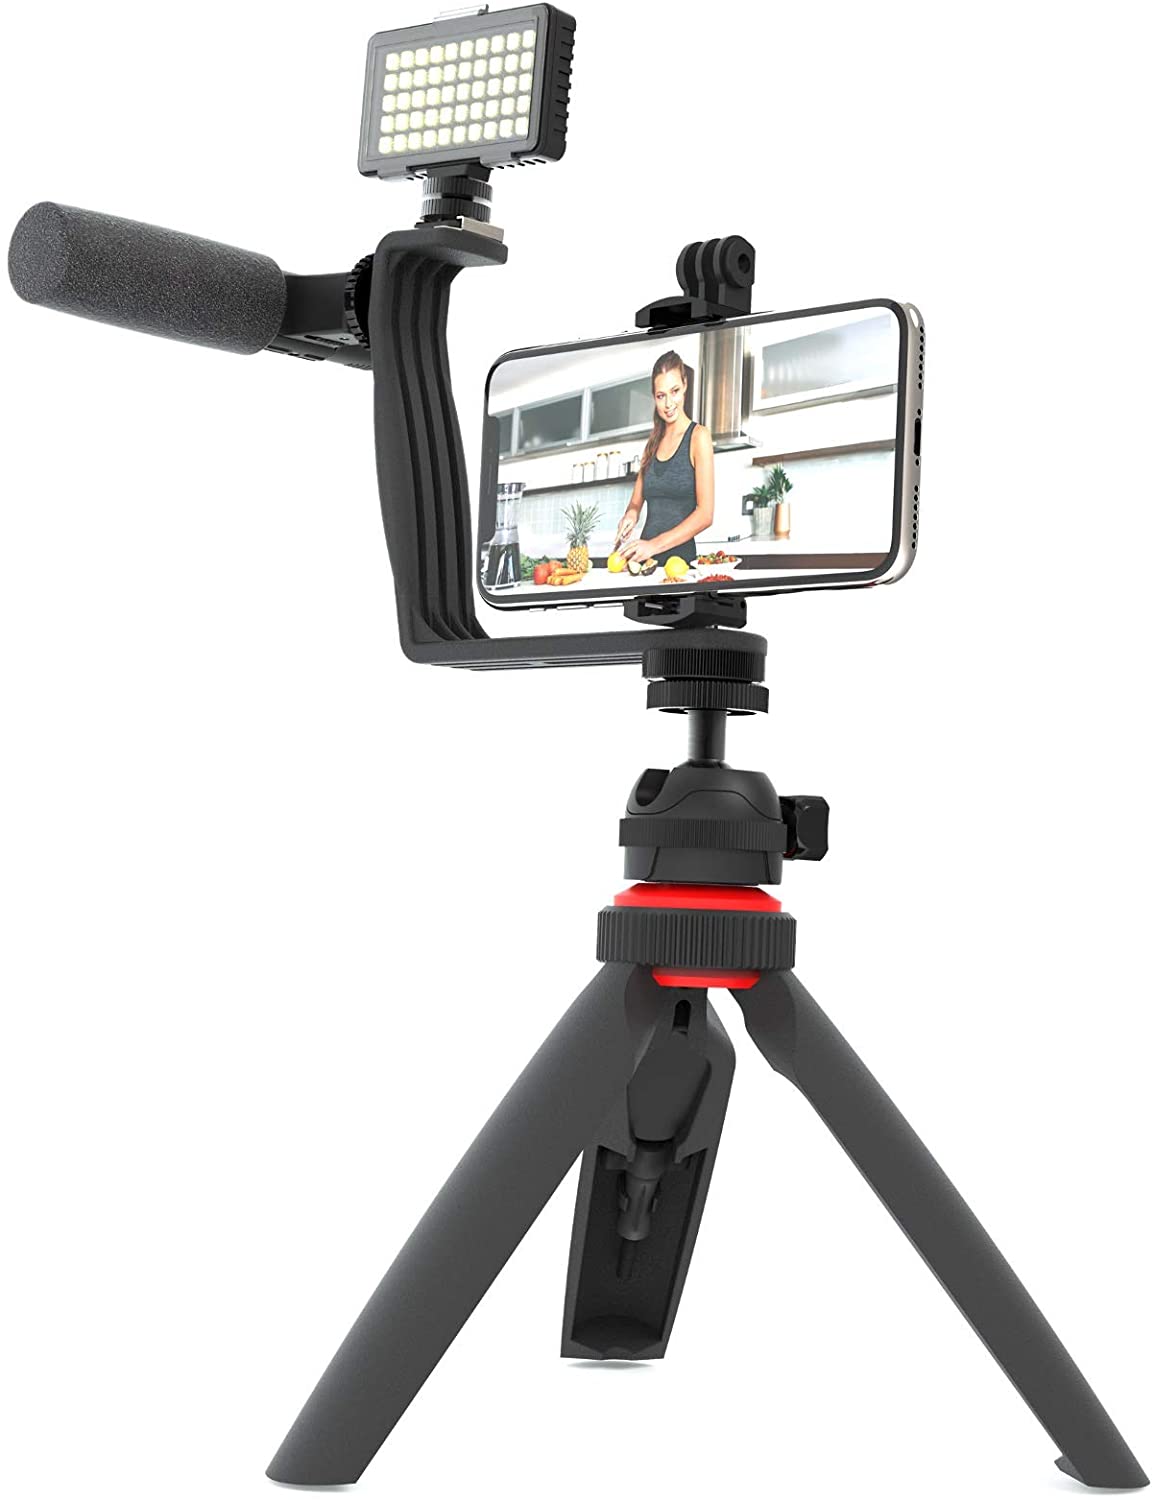 for Video Creating V-Pro Cold & Warm Video Light with Metal Tripod Metal Microphone USKEYVISION Smartphone Video Kit for iPhone 13/Mini/pro/max